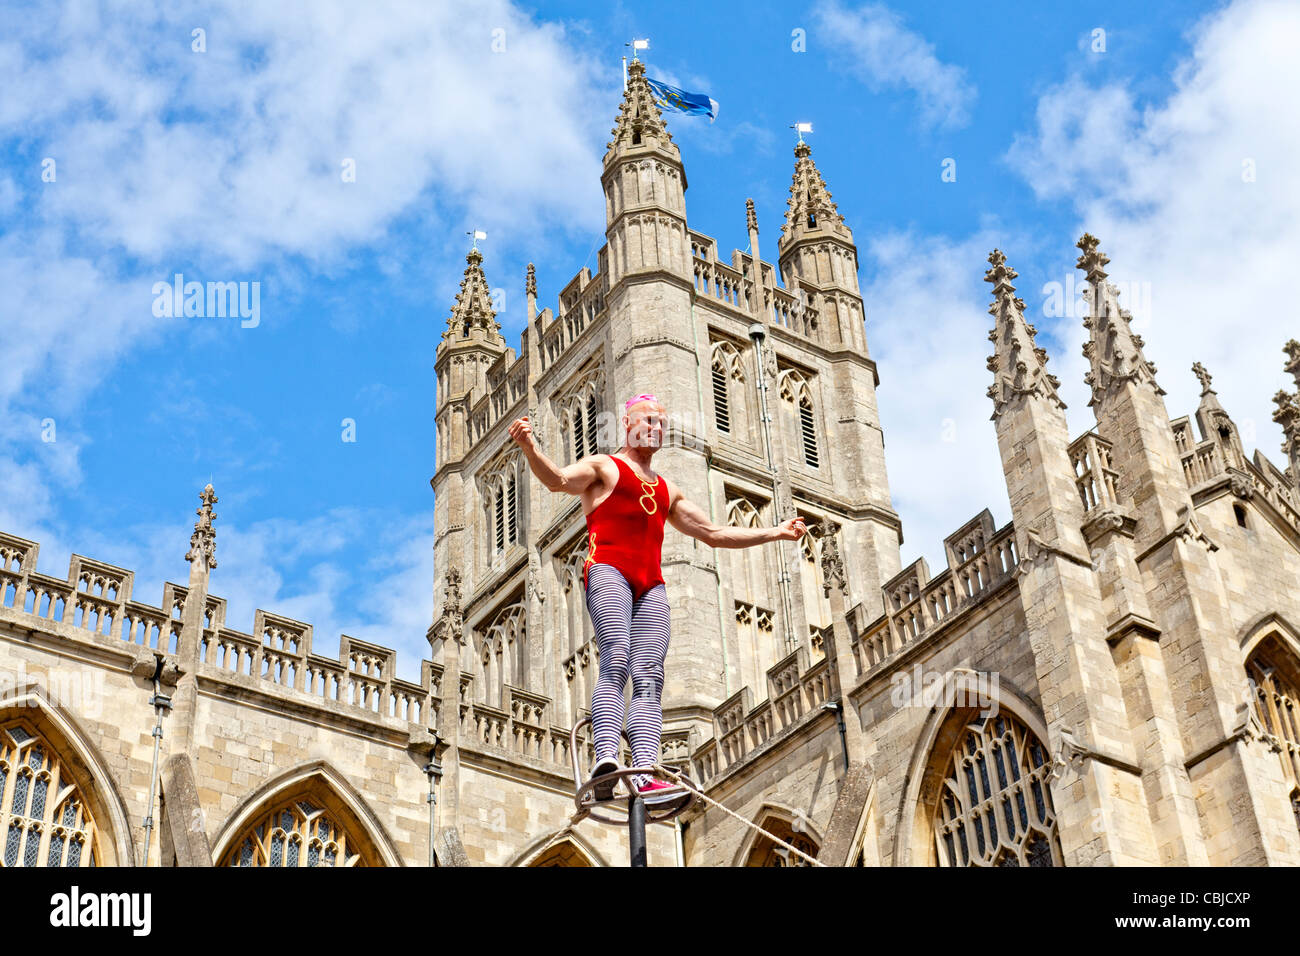 High wire street performer performing in front of the Bath Abbey, Bath Spa, England. Stock Photo